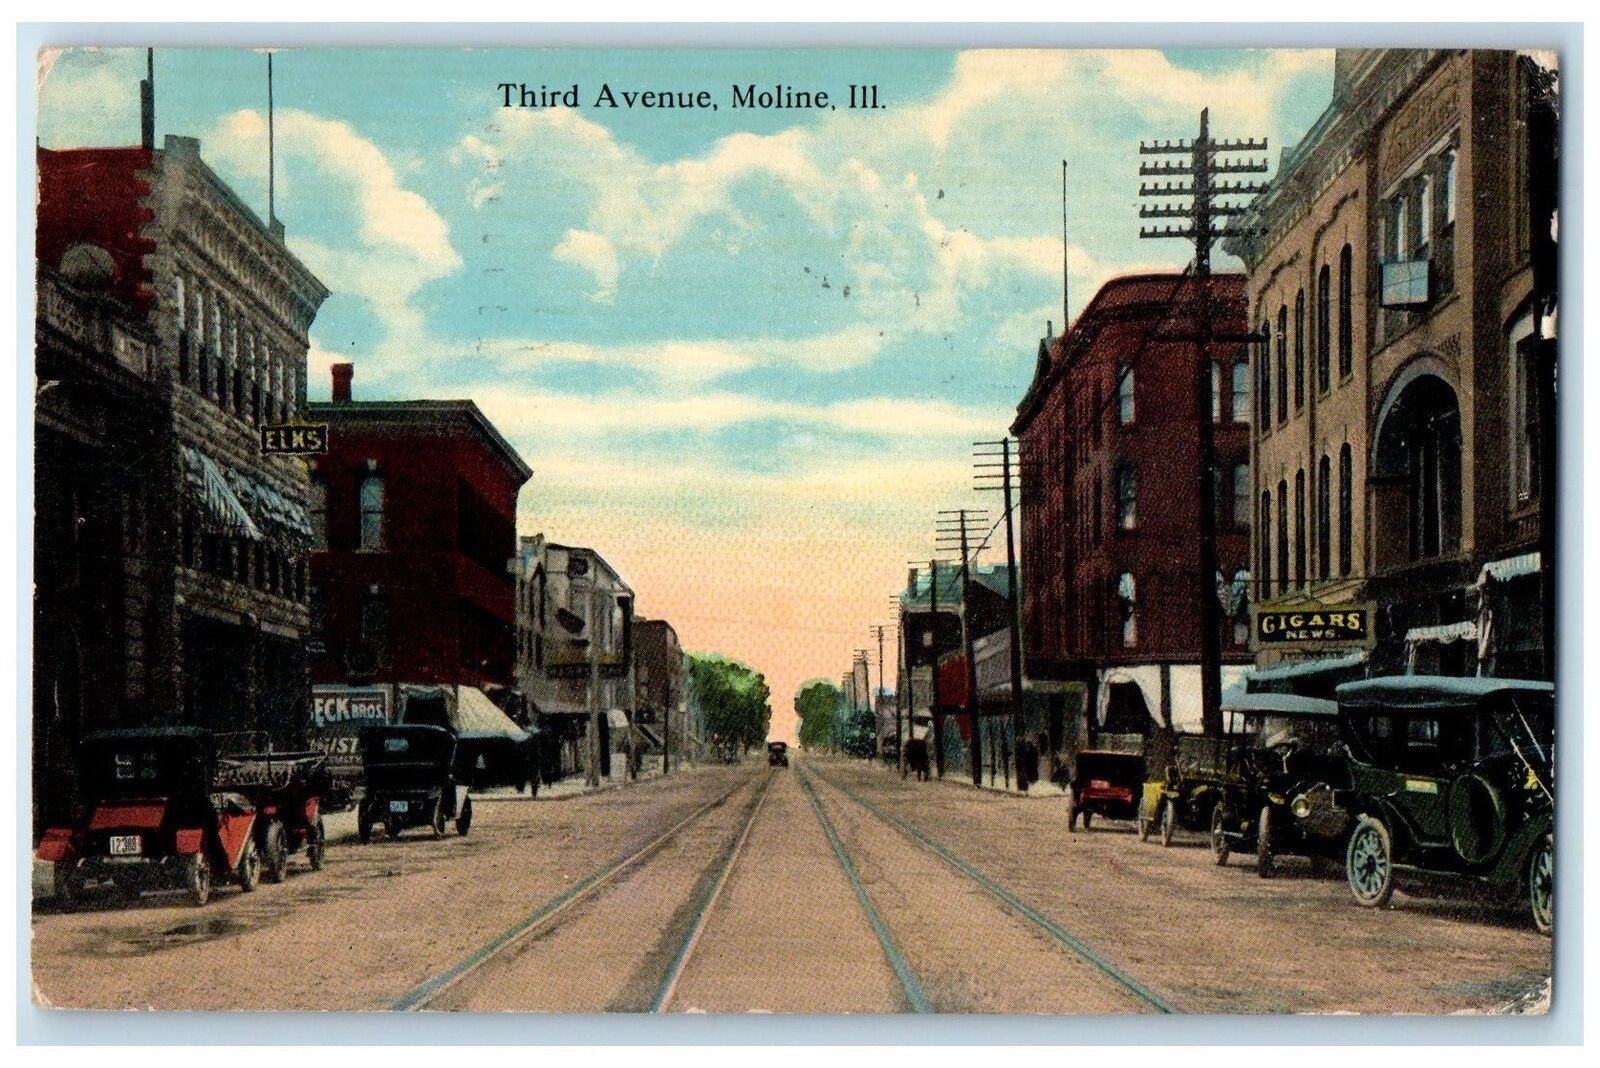 1916 Third Ave. Classic Cars Carriage Railway Building Moline Illinois Postcard